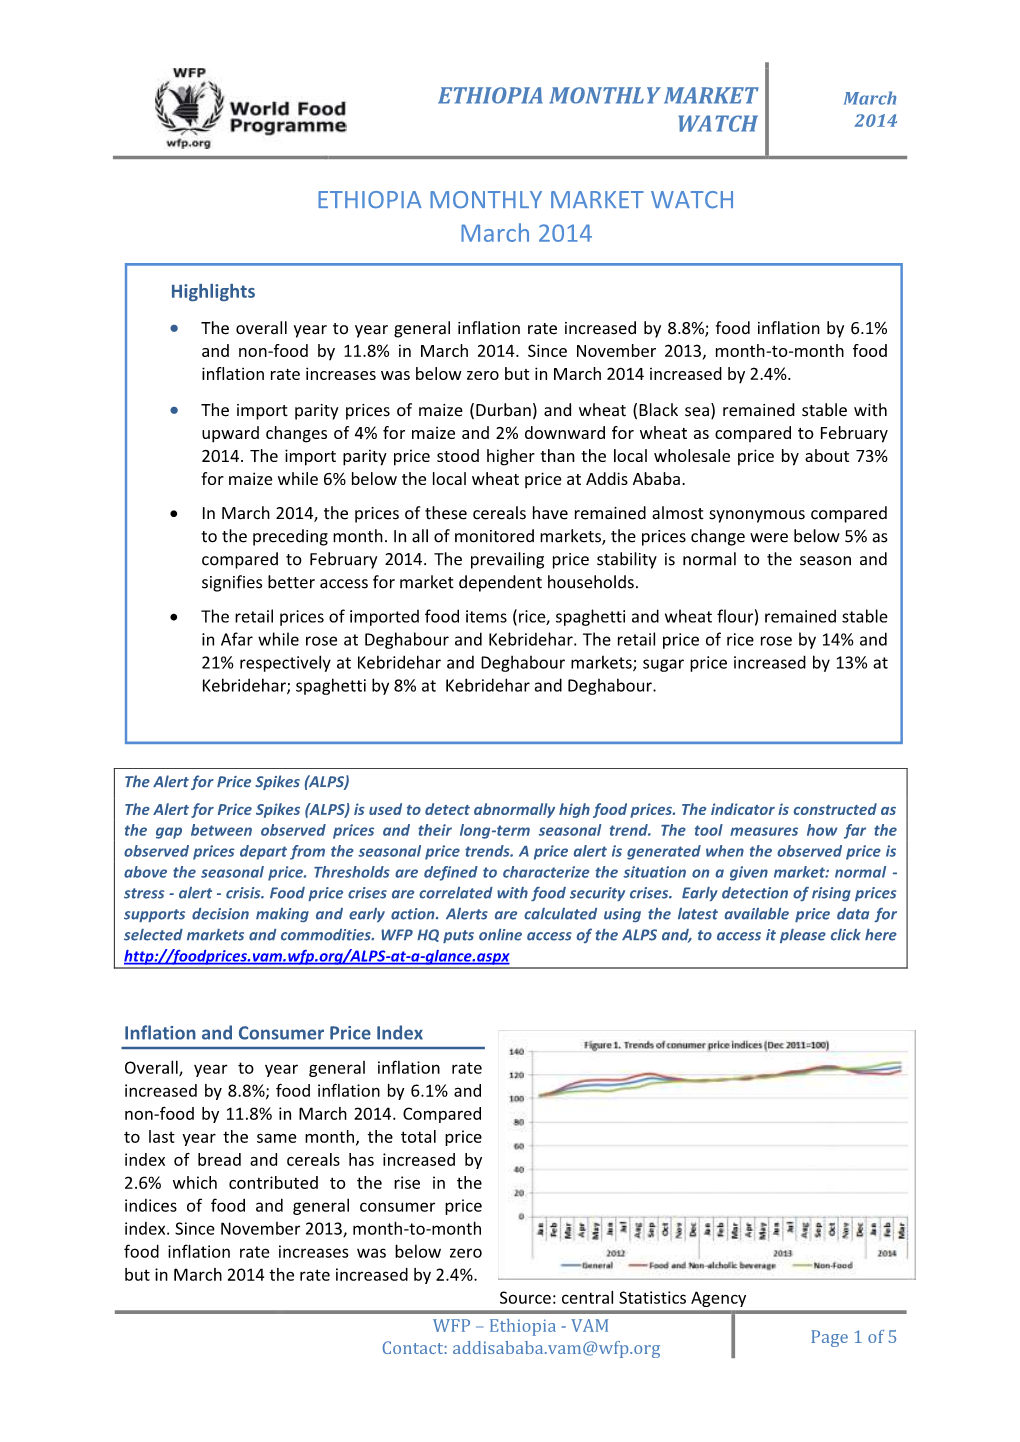 ETHIOPIA MONTHLY MARKET WATCH March 2014